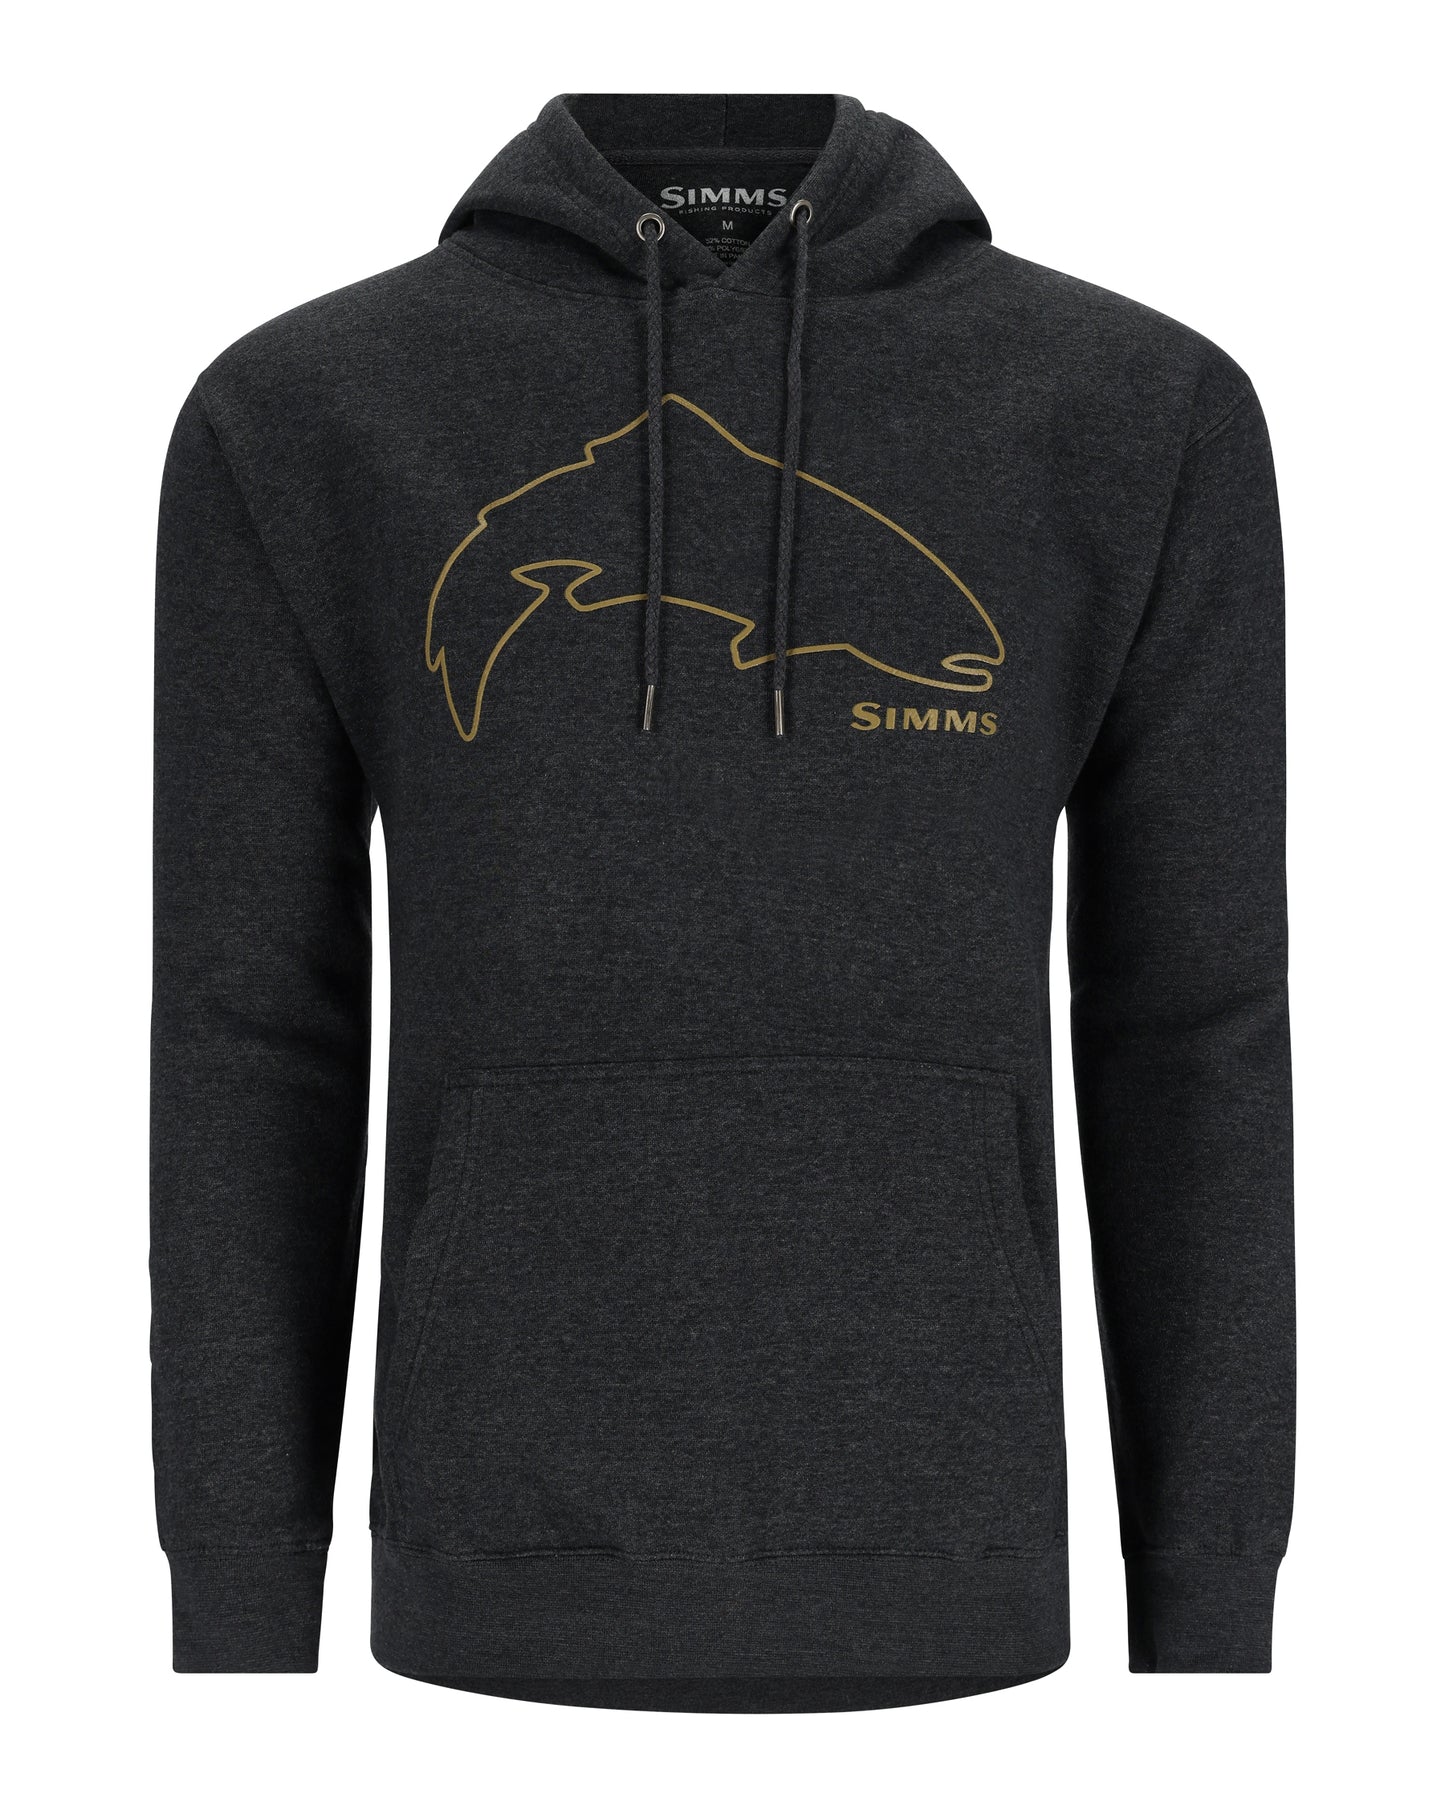 13784-086-trout-outline-hoody-Mannequin-s23-front -rollover